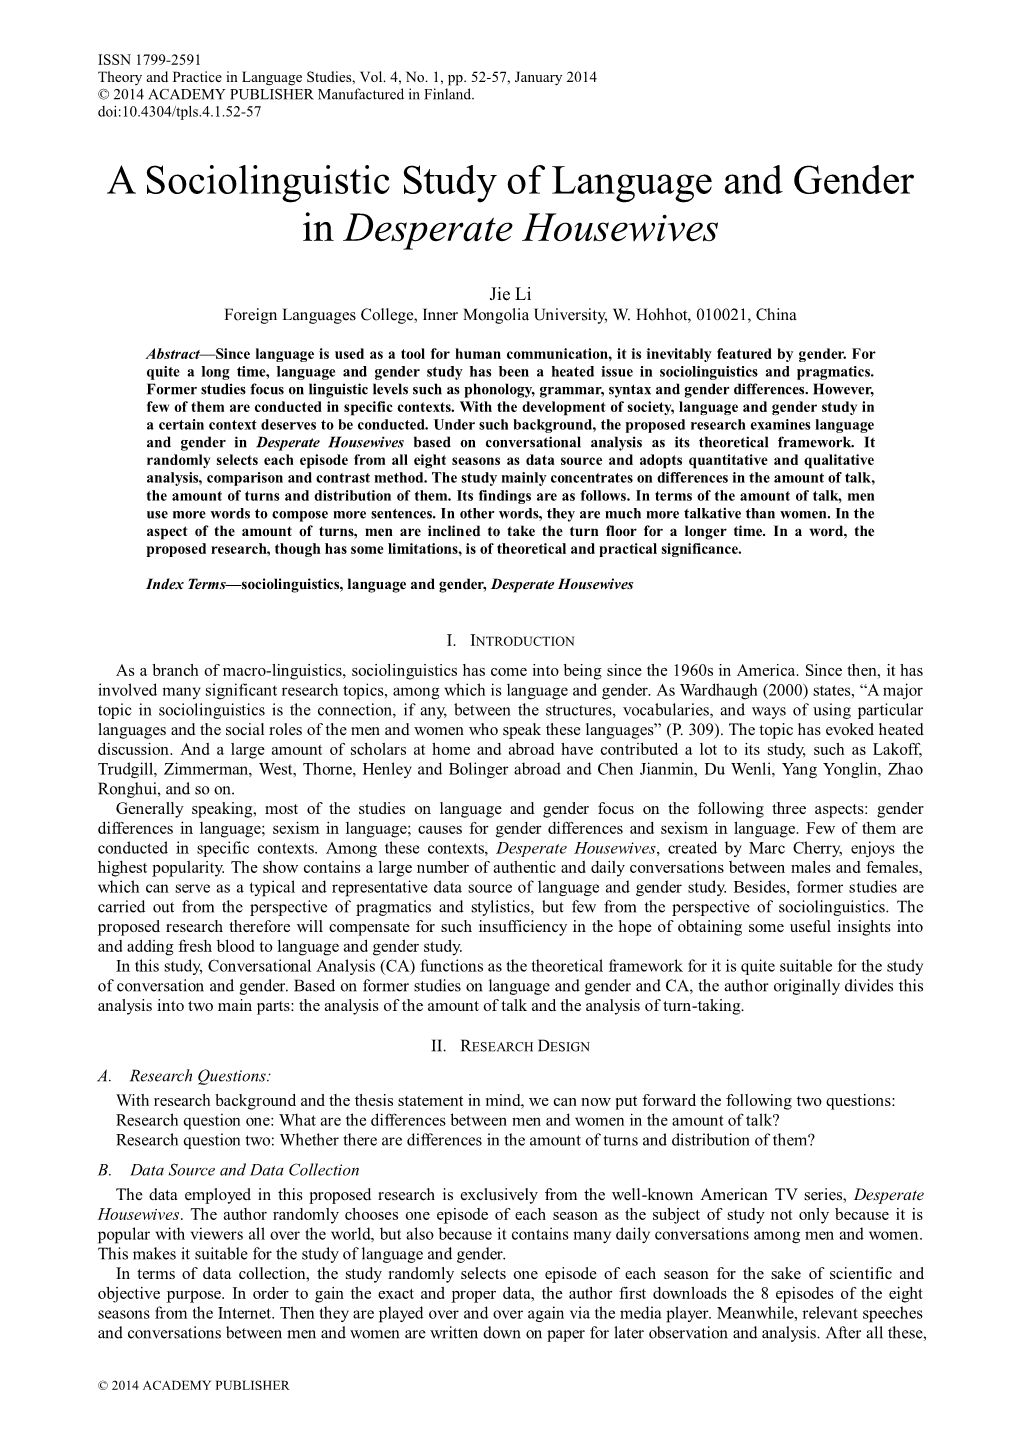 A Sociolinguistic Study of Language and Gender in Desperate Housewives